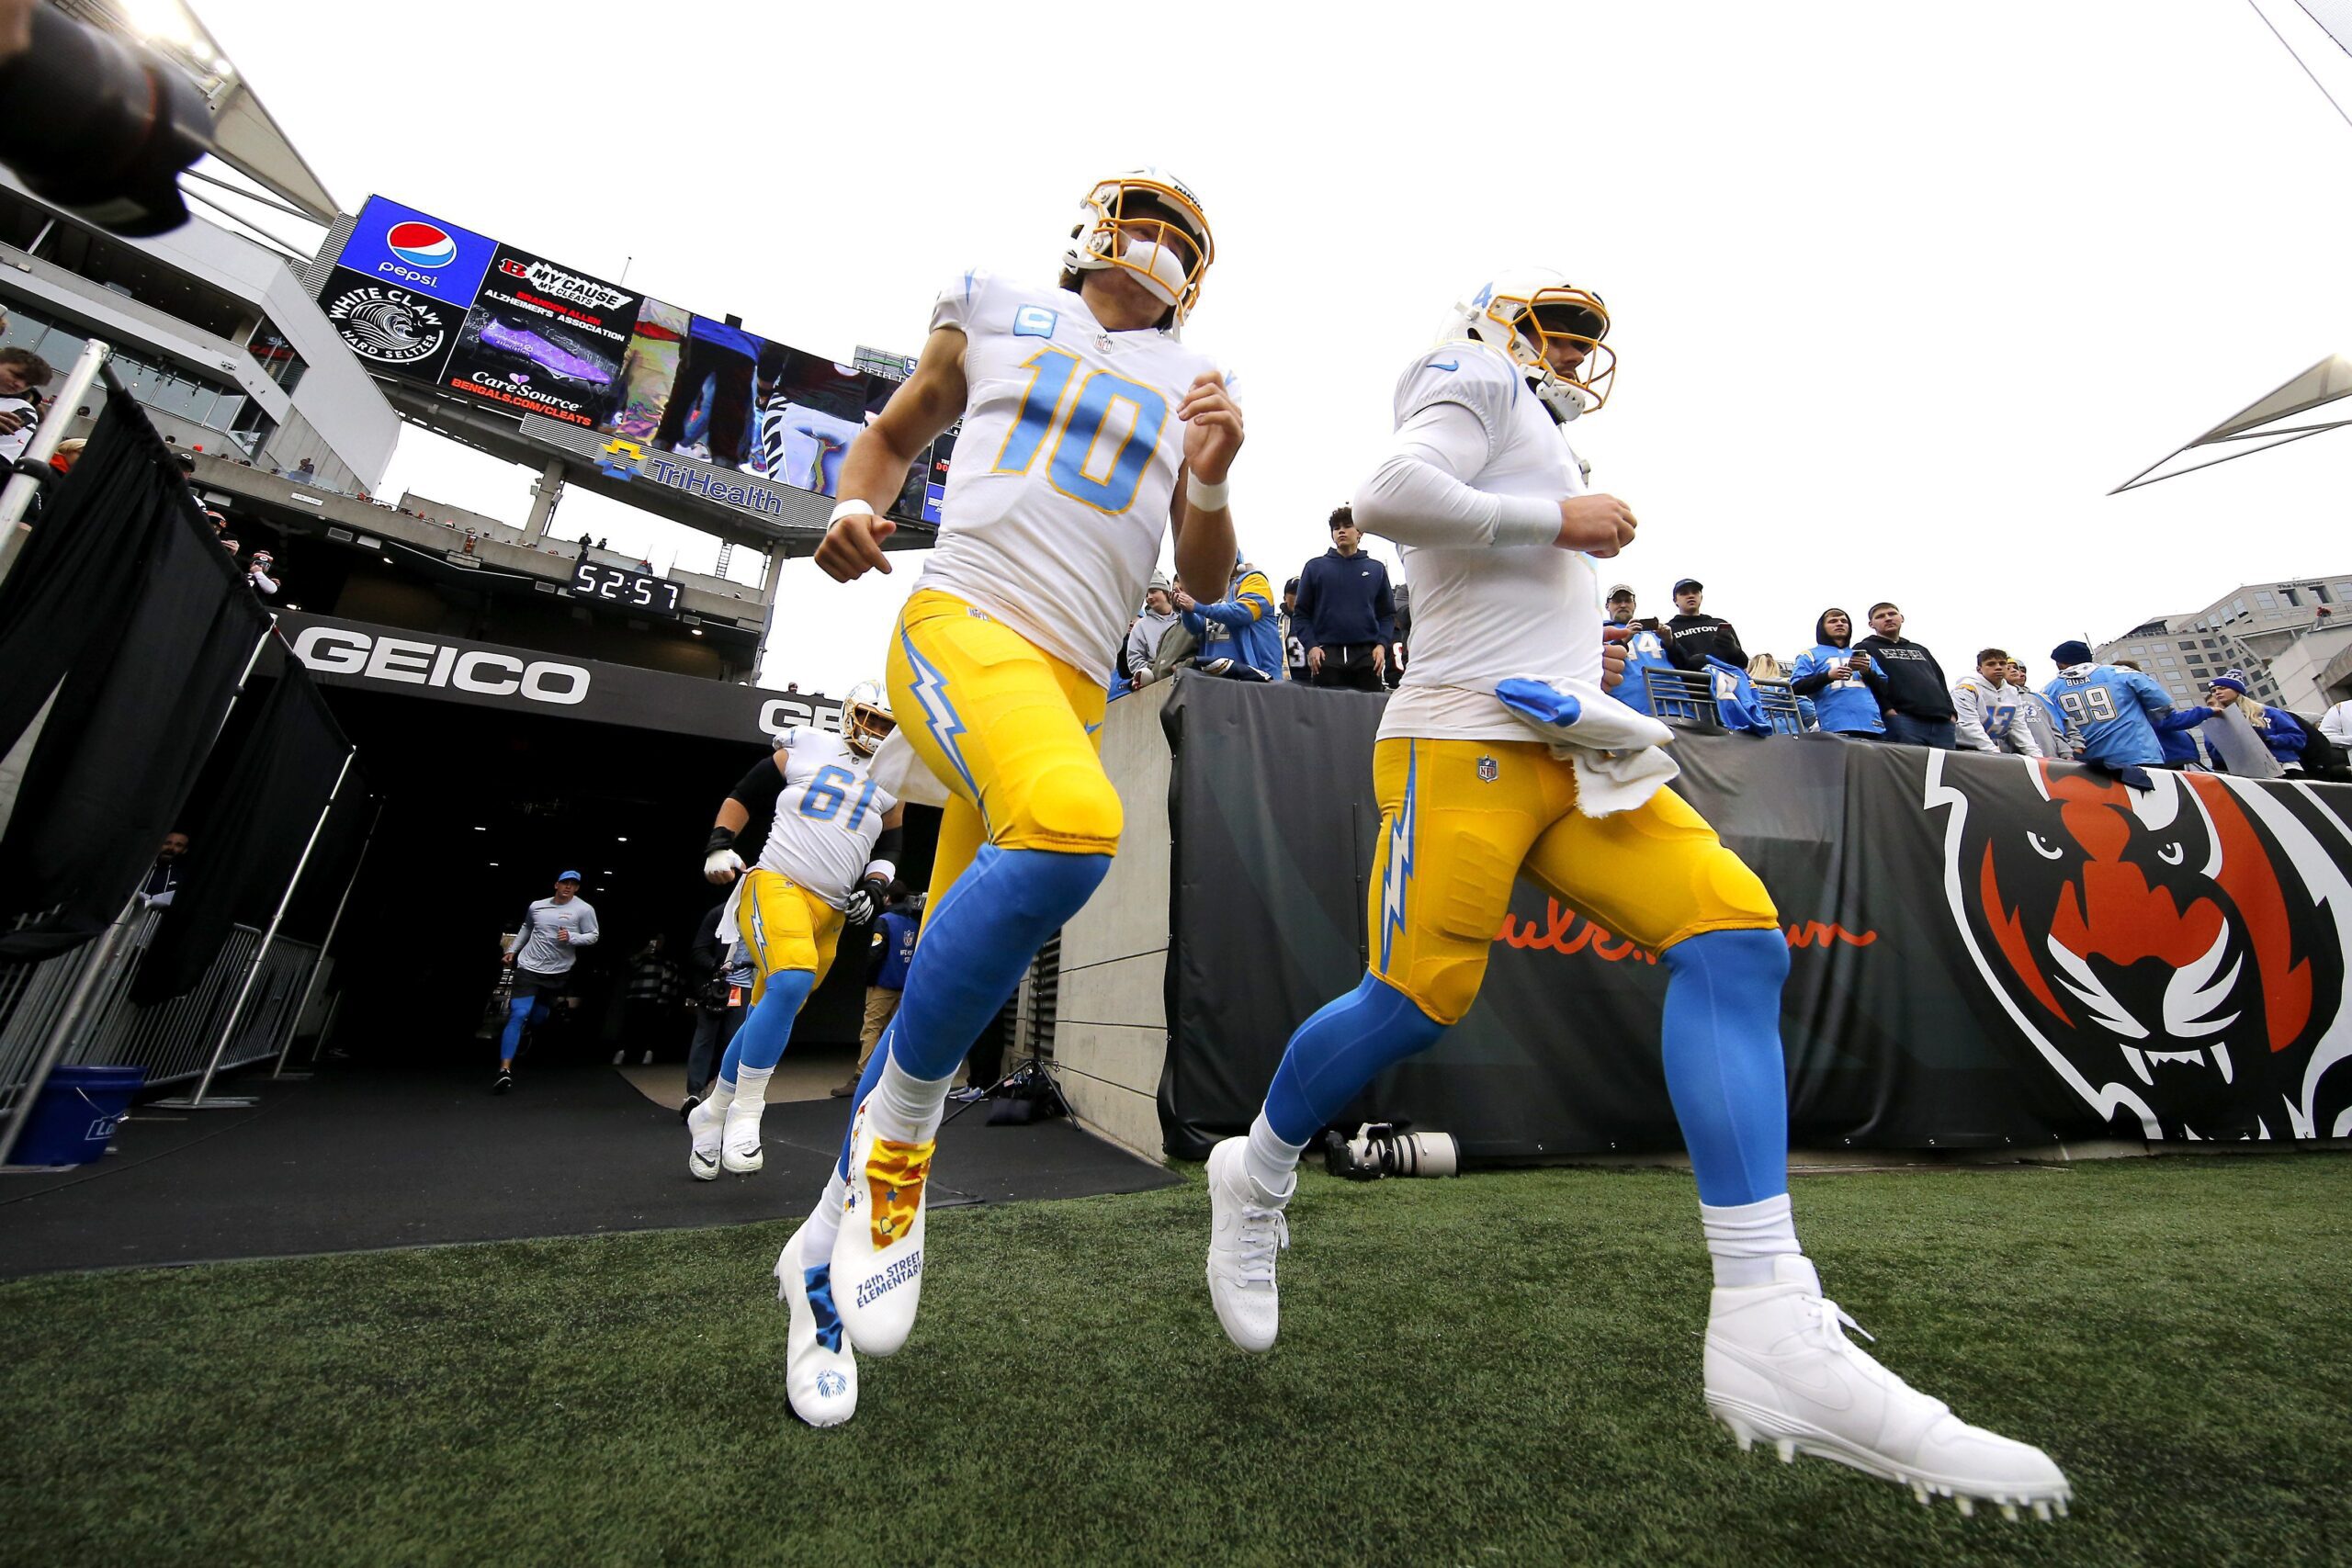 Los Angeles Chargers entering the field running